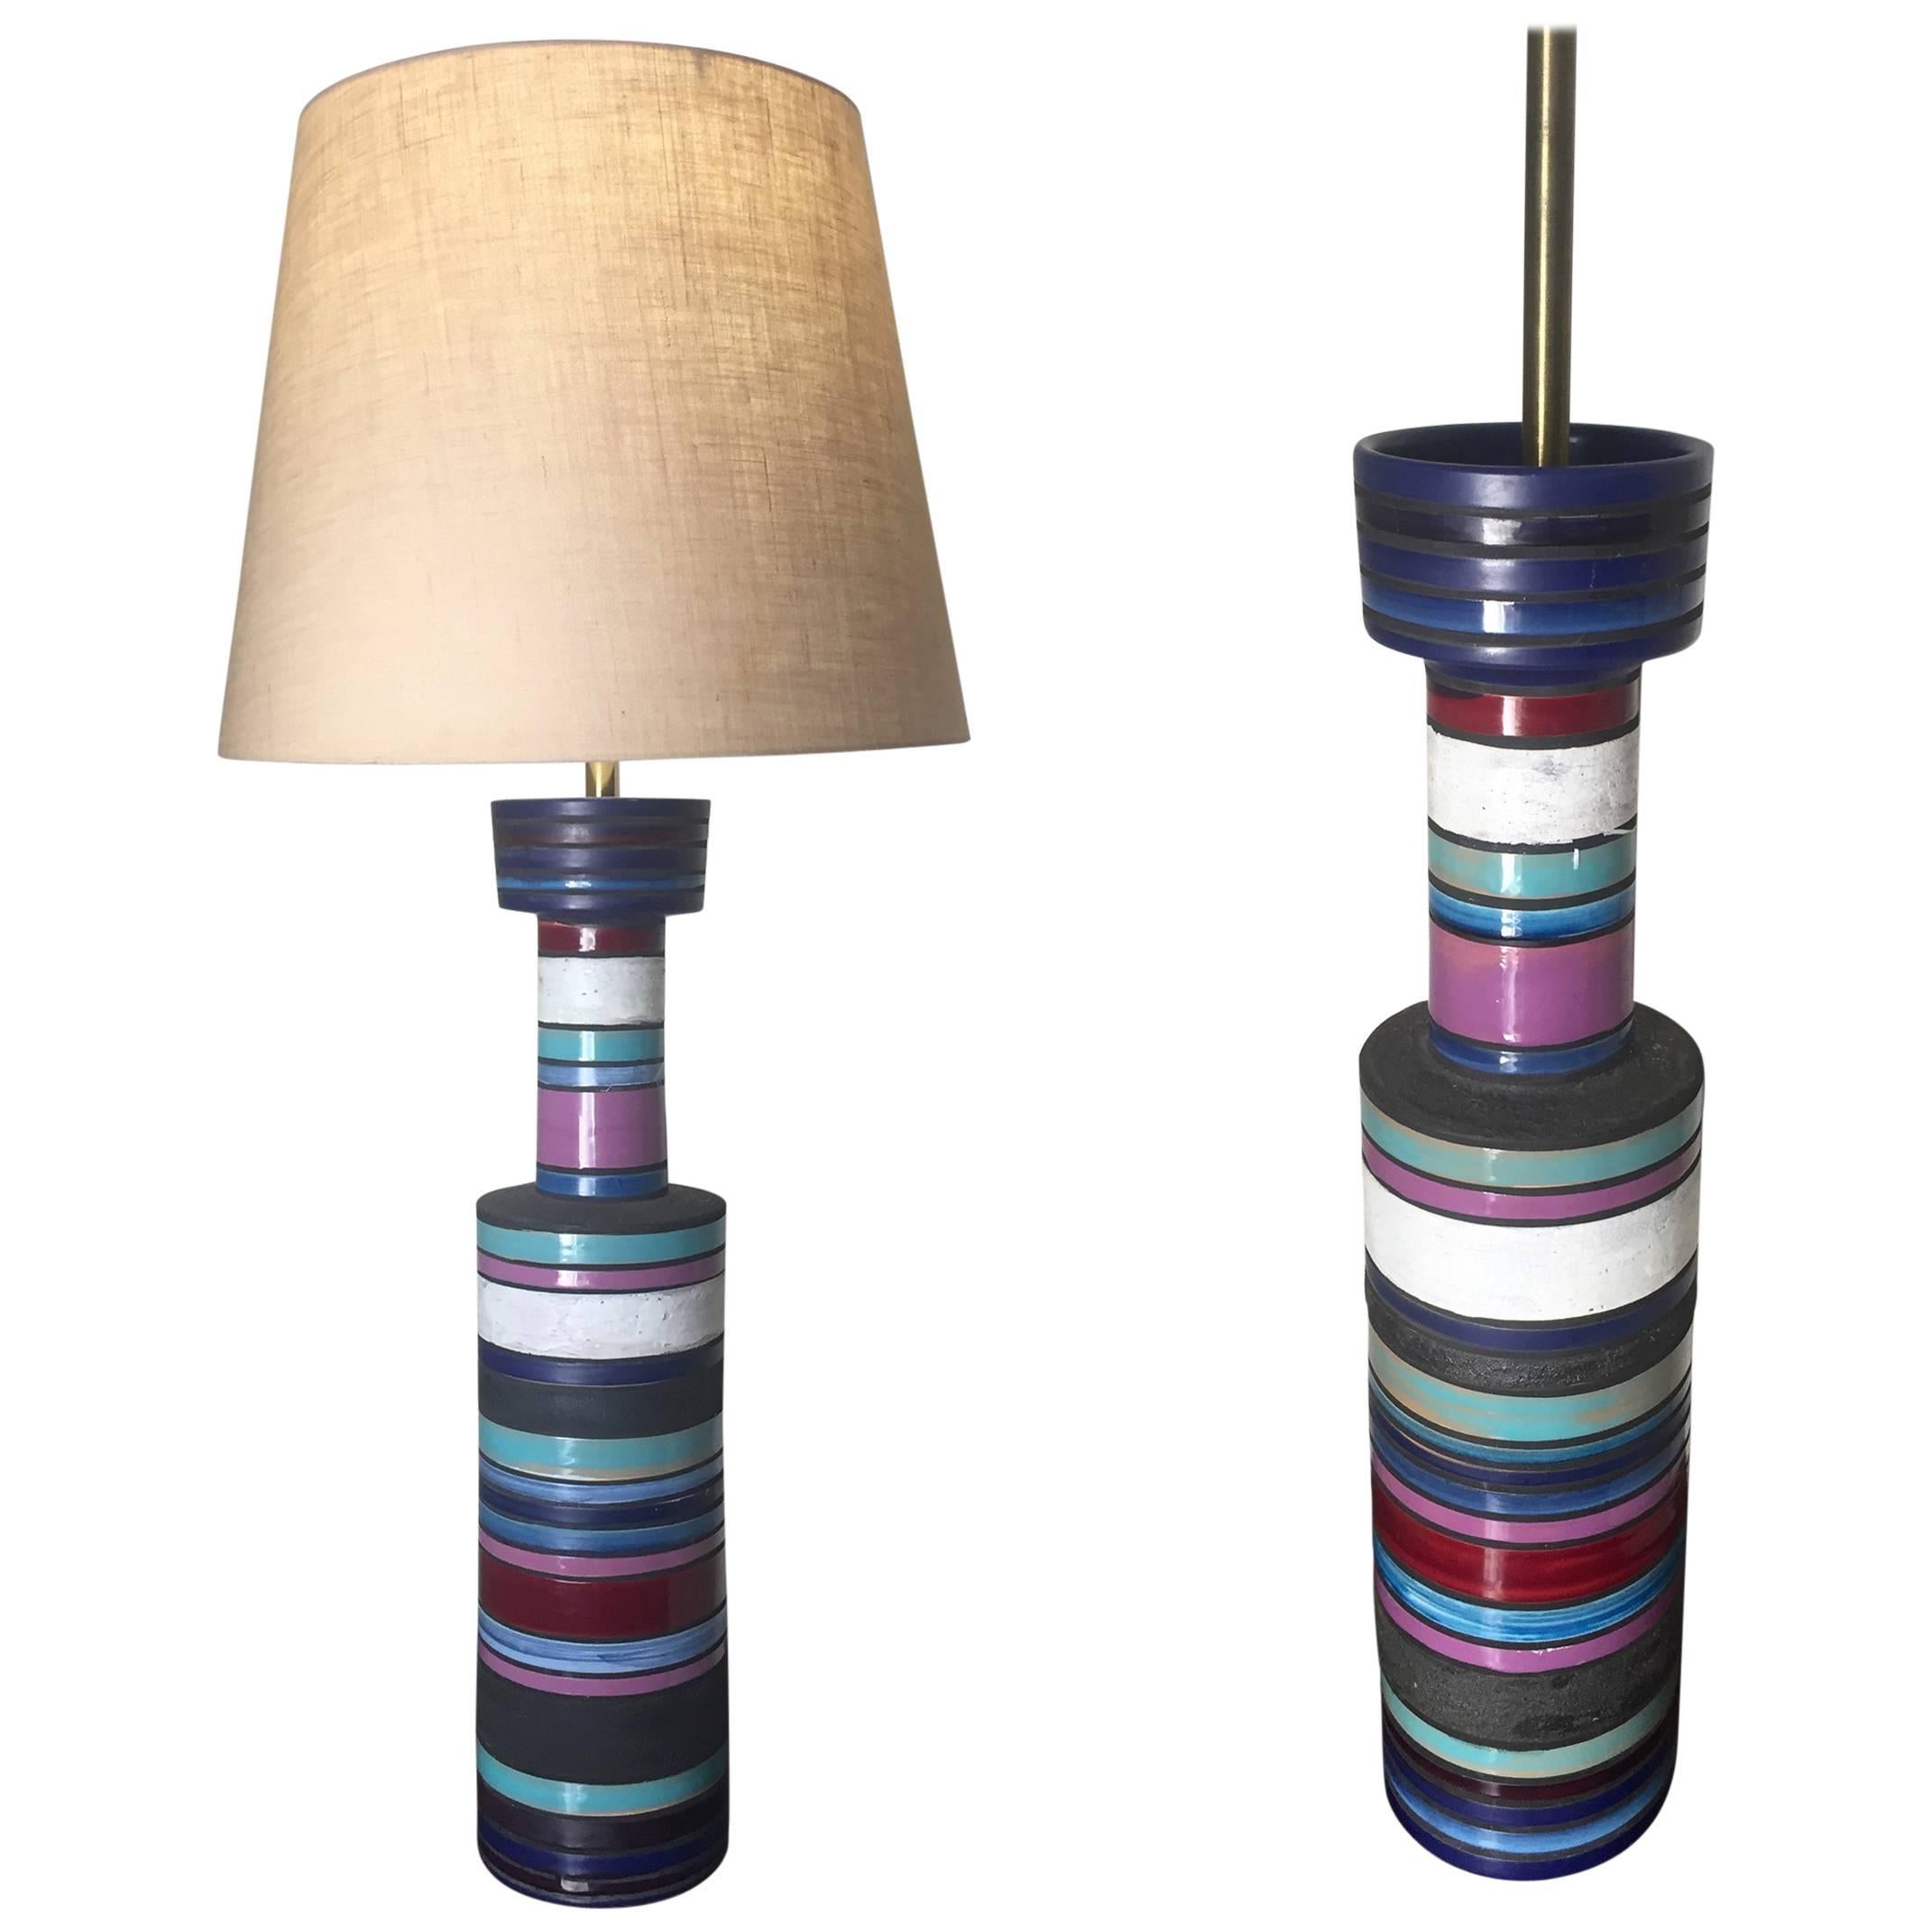 Pair of Cambogia Table Lamps by Aldo Londi for Bitossi, Italy 1950s